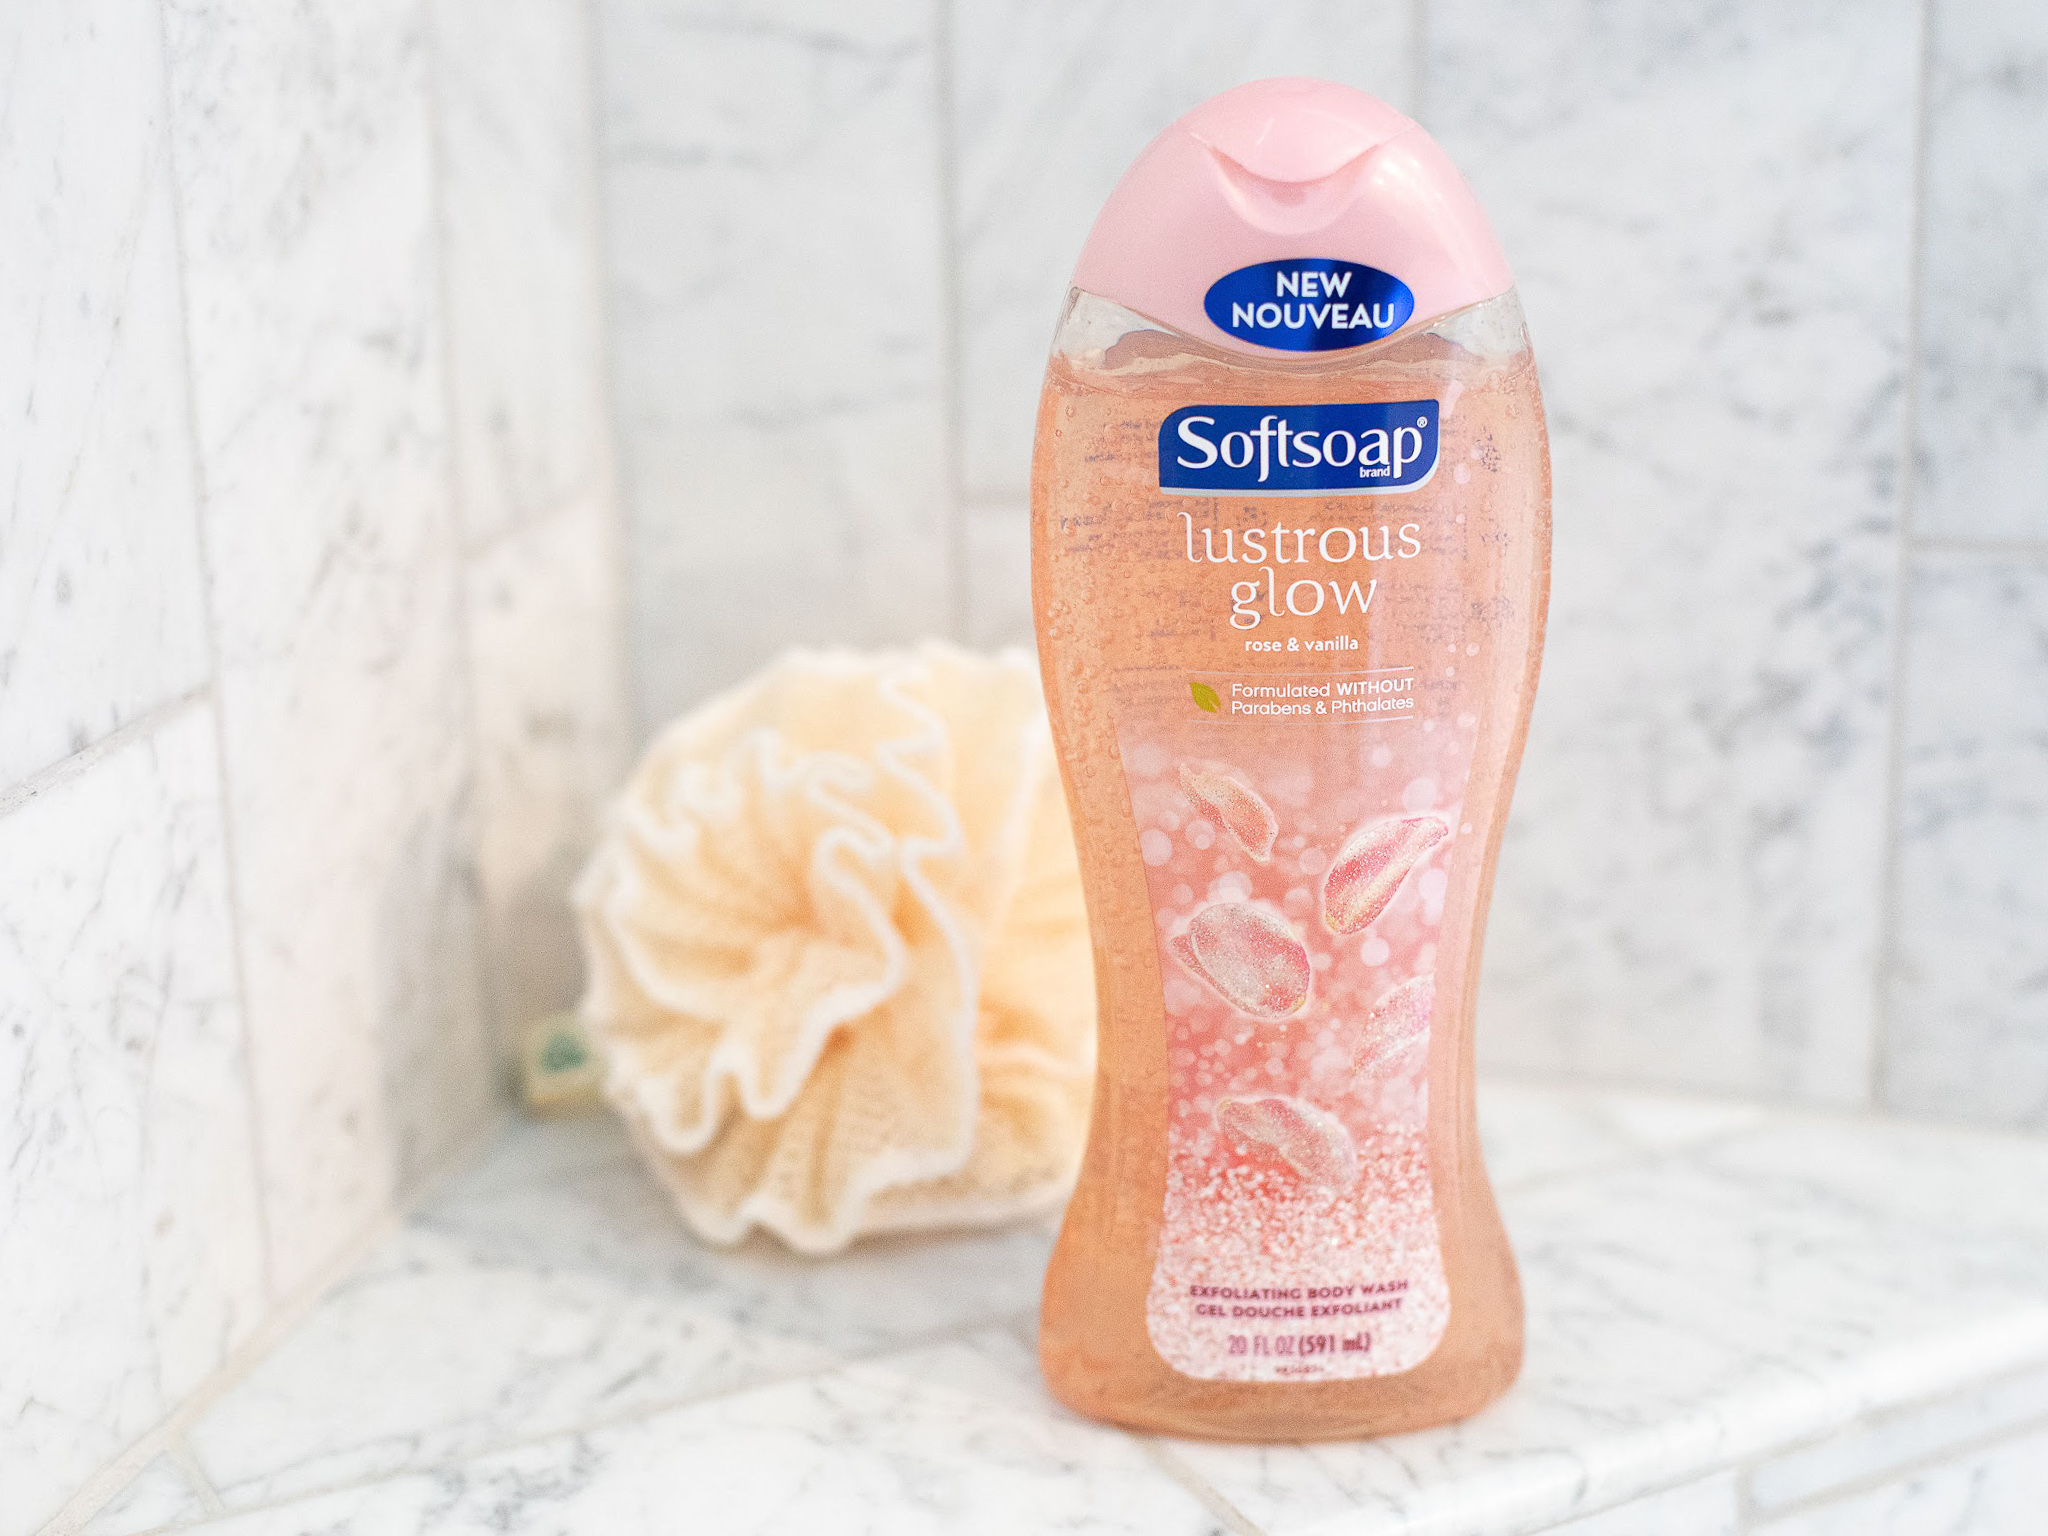 Softsoap Body Wash As Low As $3.49 At Kroger